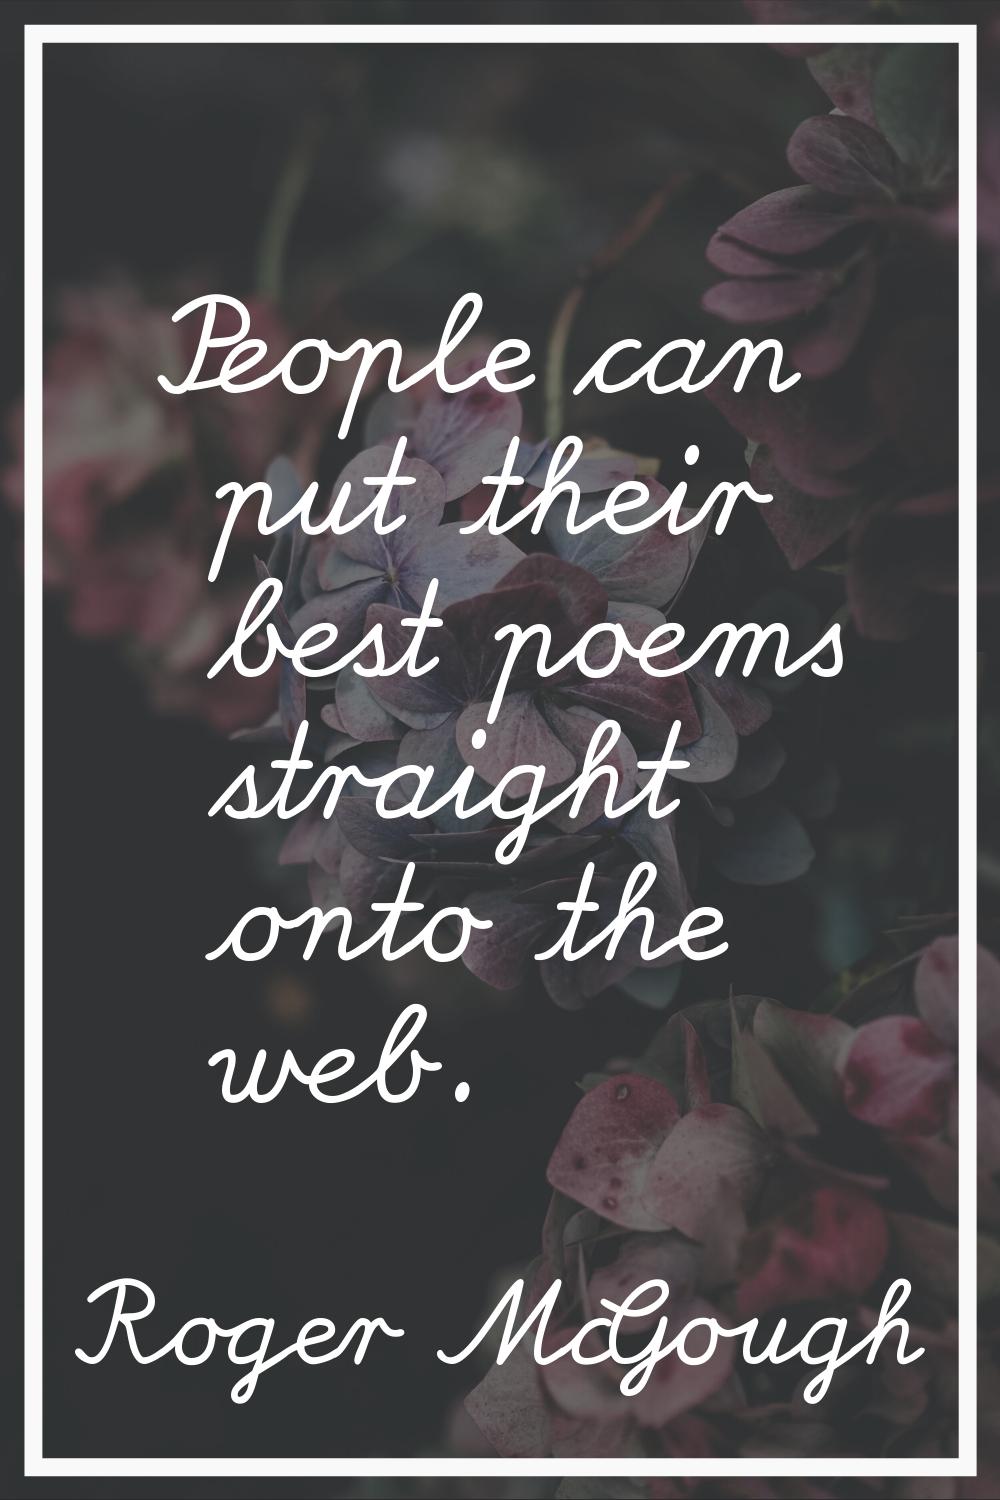 People can put their best poems straight onto the web.